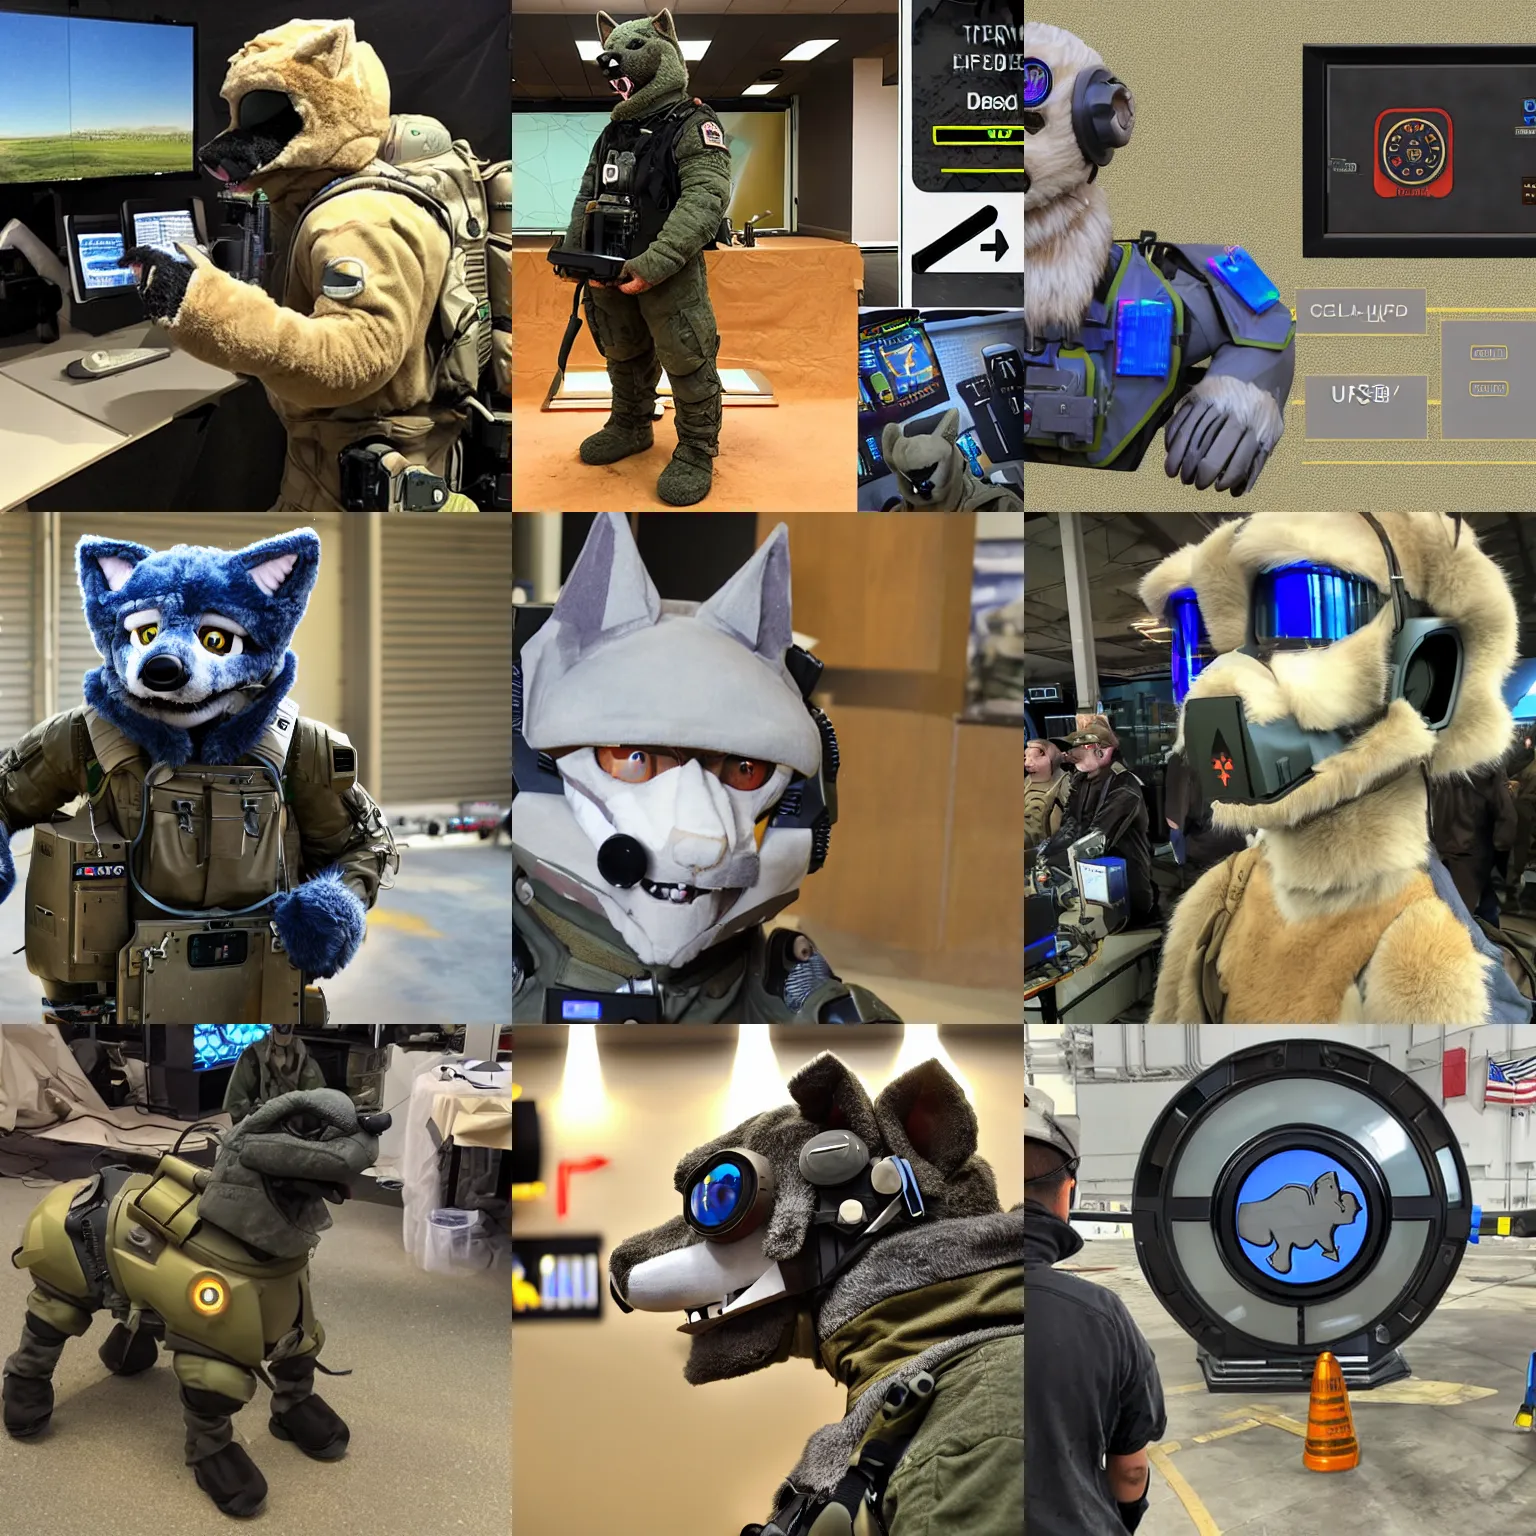 Prompt: A fully operational DARPA-designed fursuit with a full suite of features including: HUD display, portable generator, self-contained sealed environment, and emergency countermeasures.